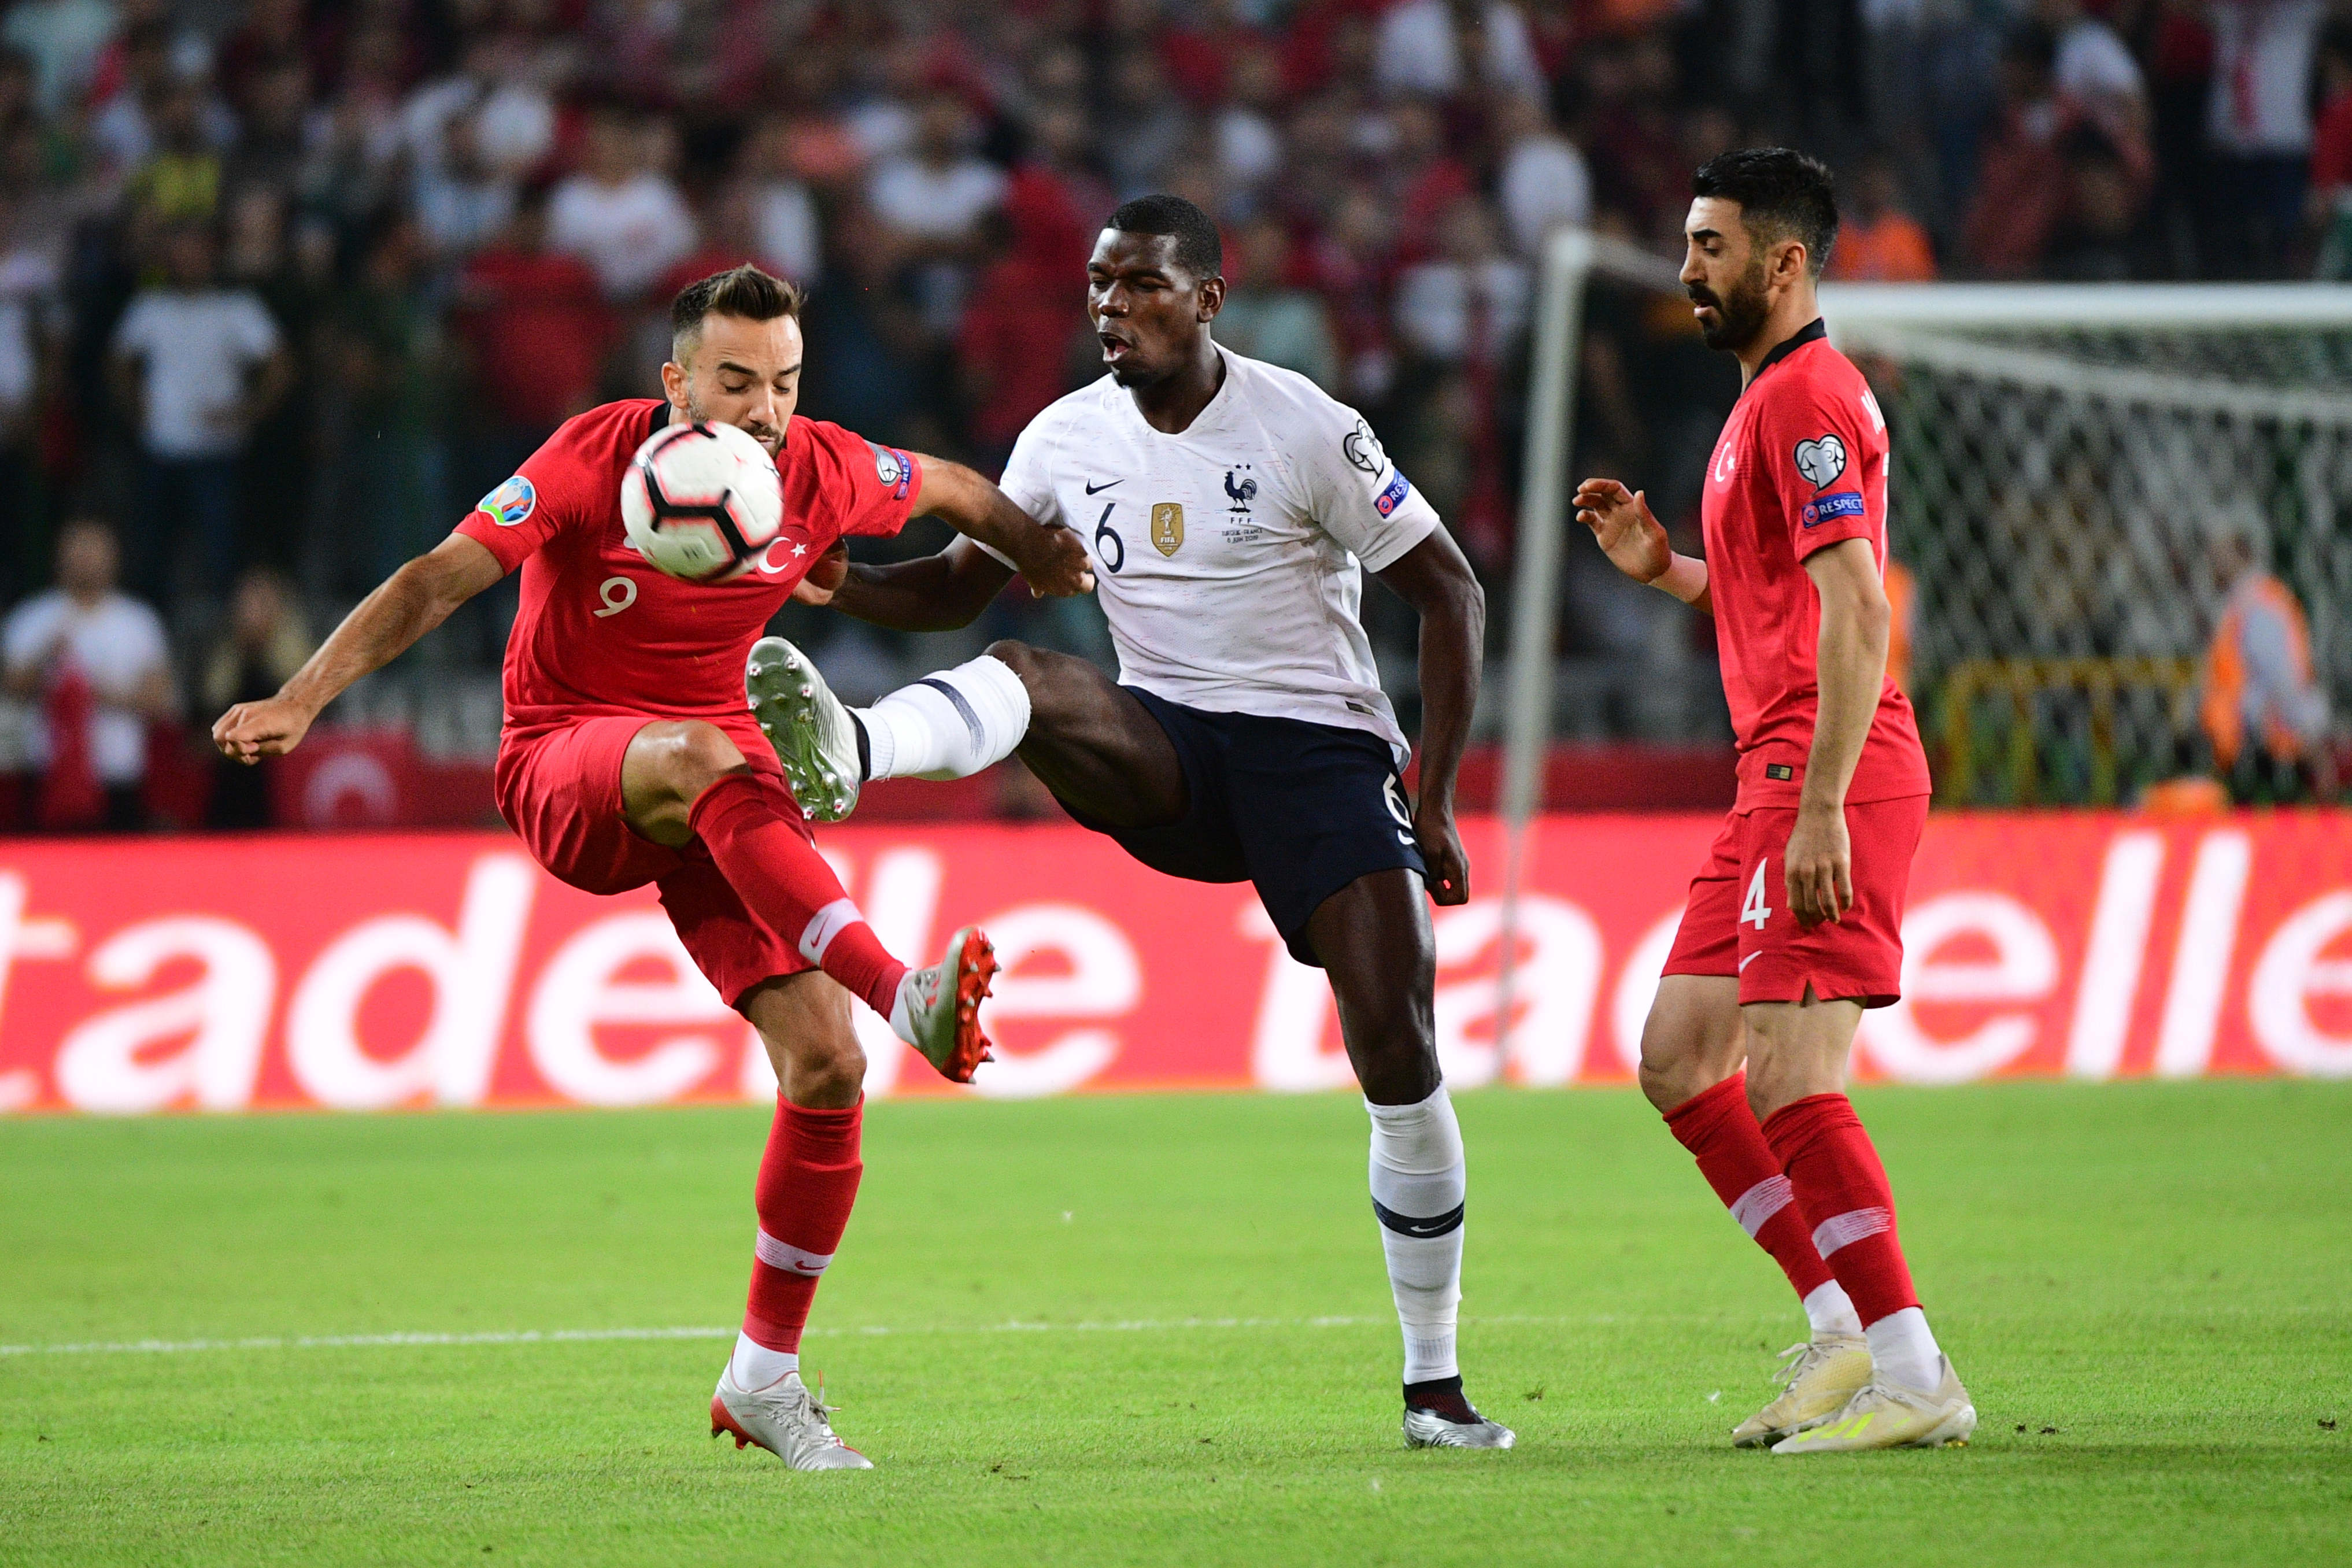 (R-L) Paul Pogba of France and Enes Unal of Turkey during the Euro 2020 qualifying match between Turkey and France on June 8, 2019 in Konya, Turkey. (Photo by Dave Winter/Icon Sport)